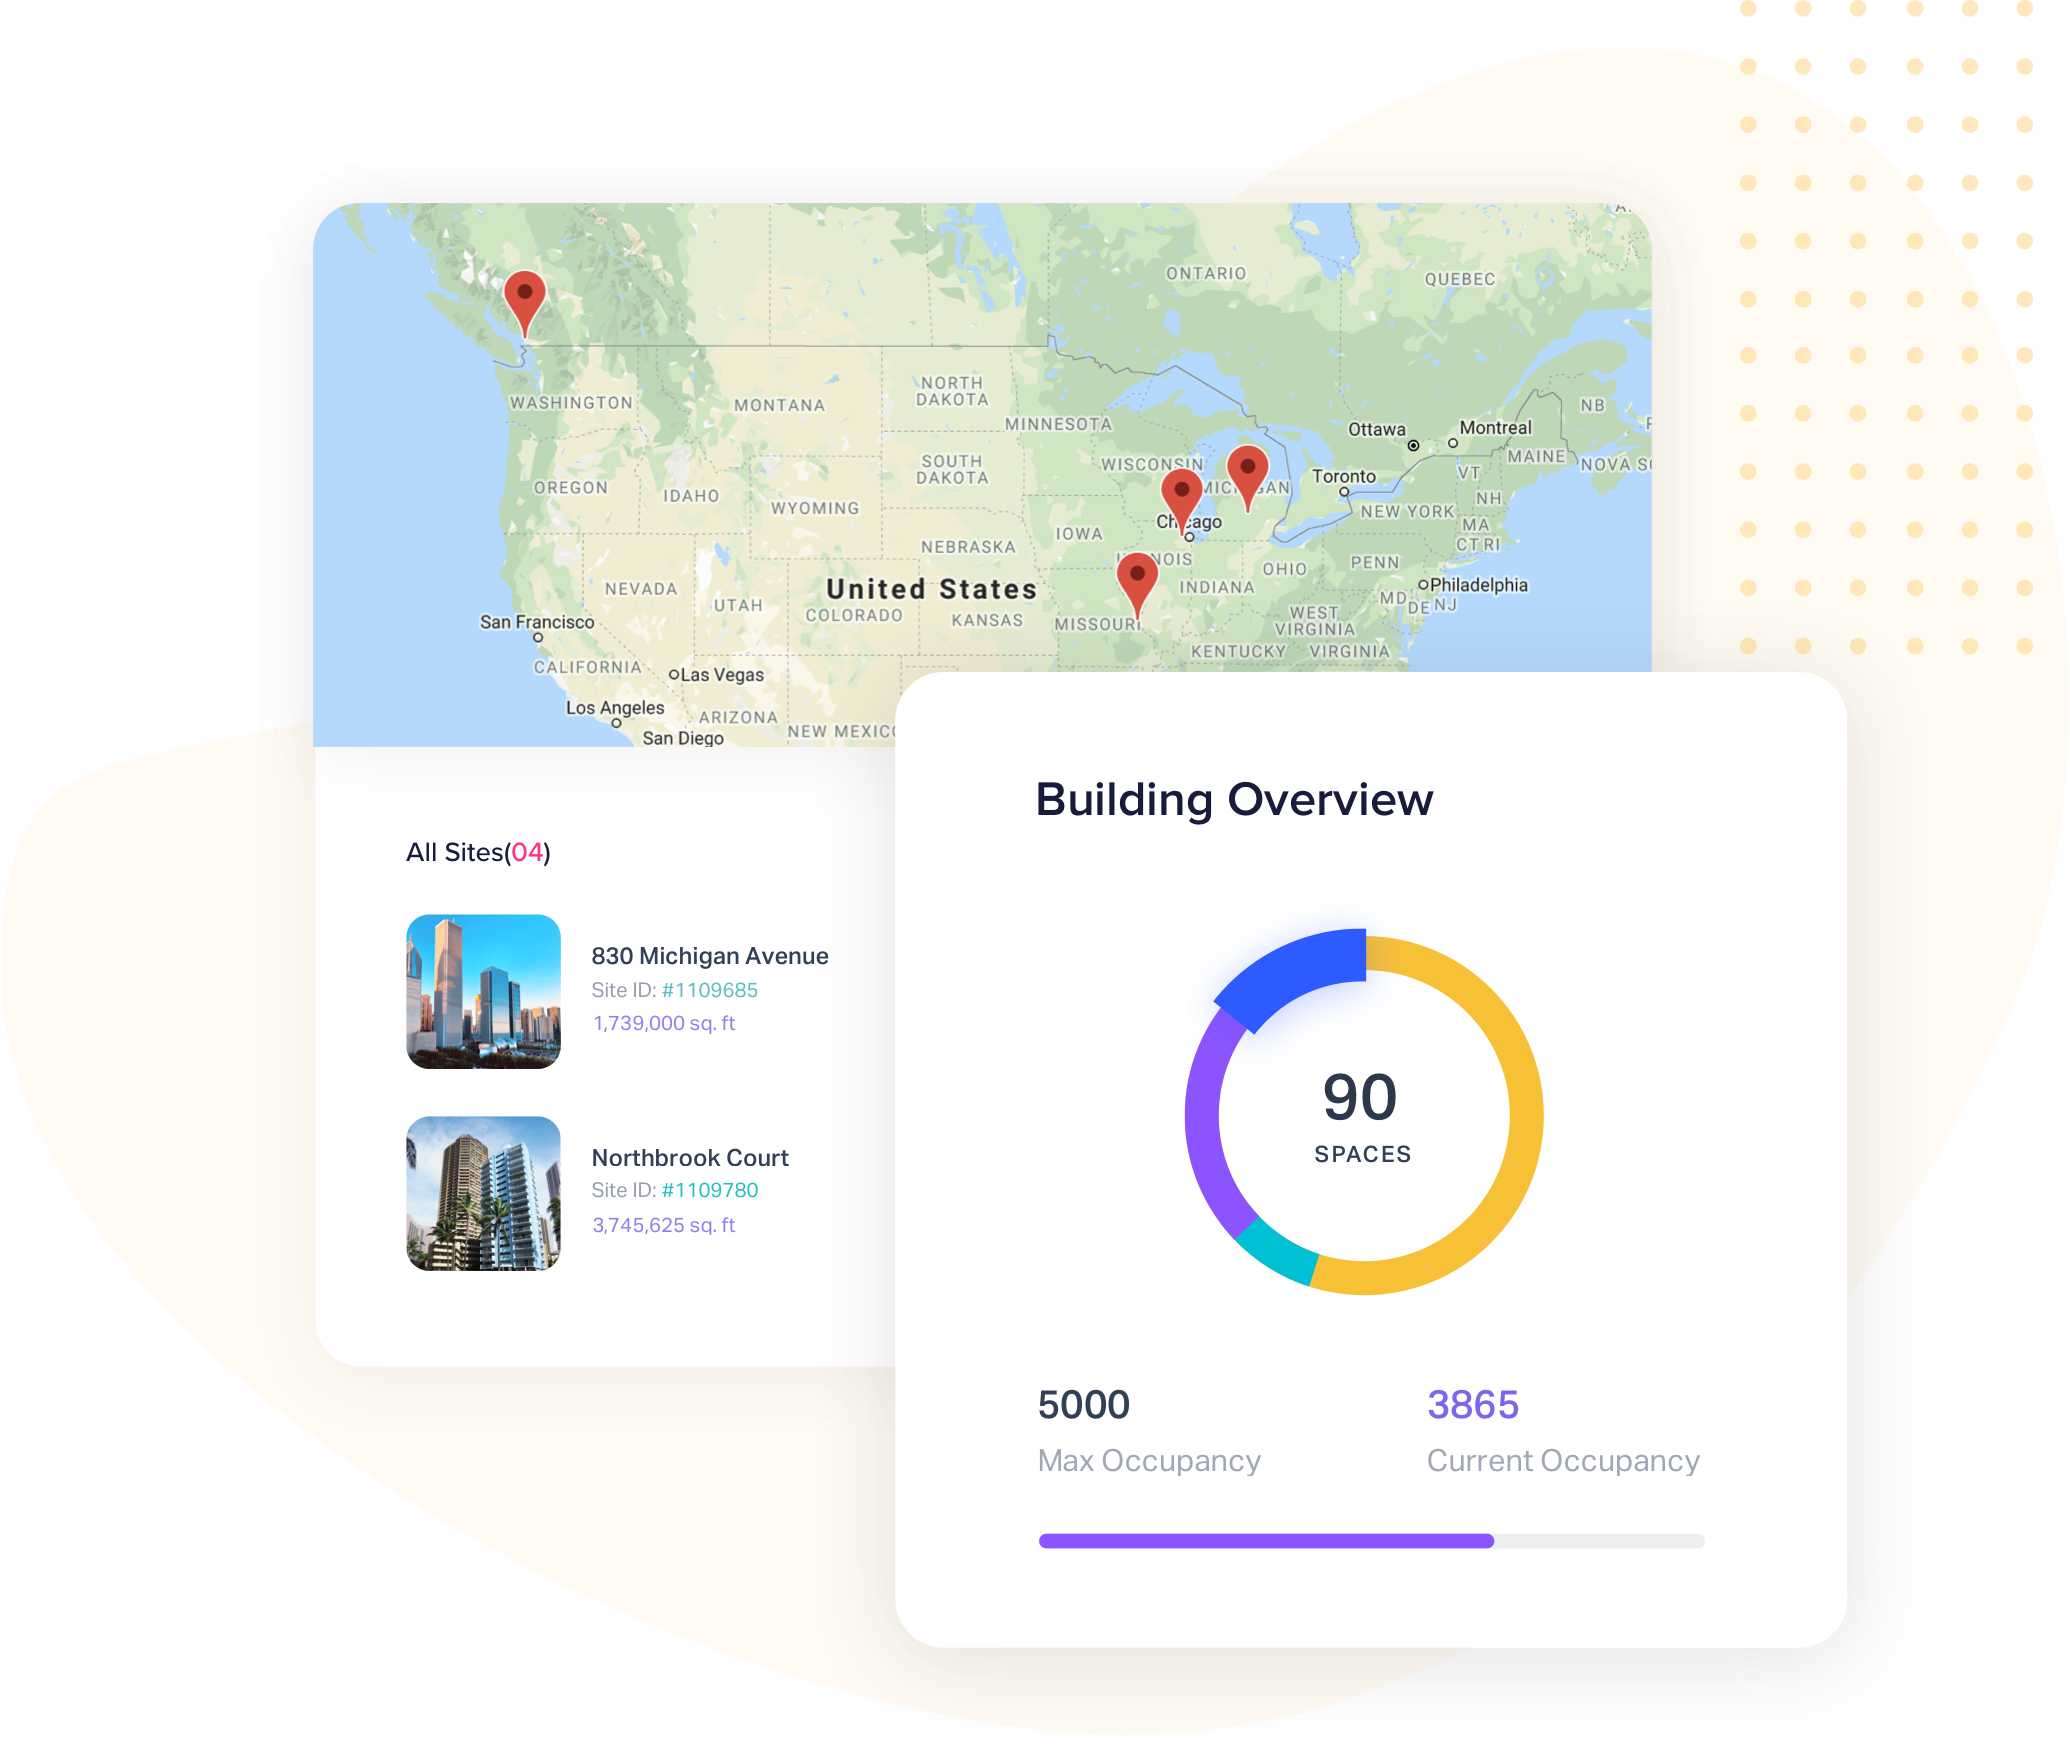 Get an overview of all the buildings in your portfolio and dive into data like current occupany and max capacity across X spaces in a buildng